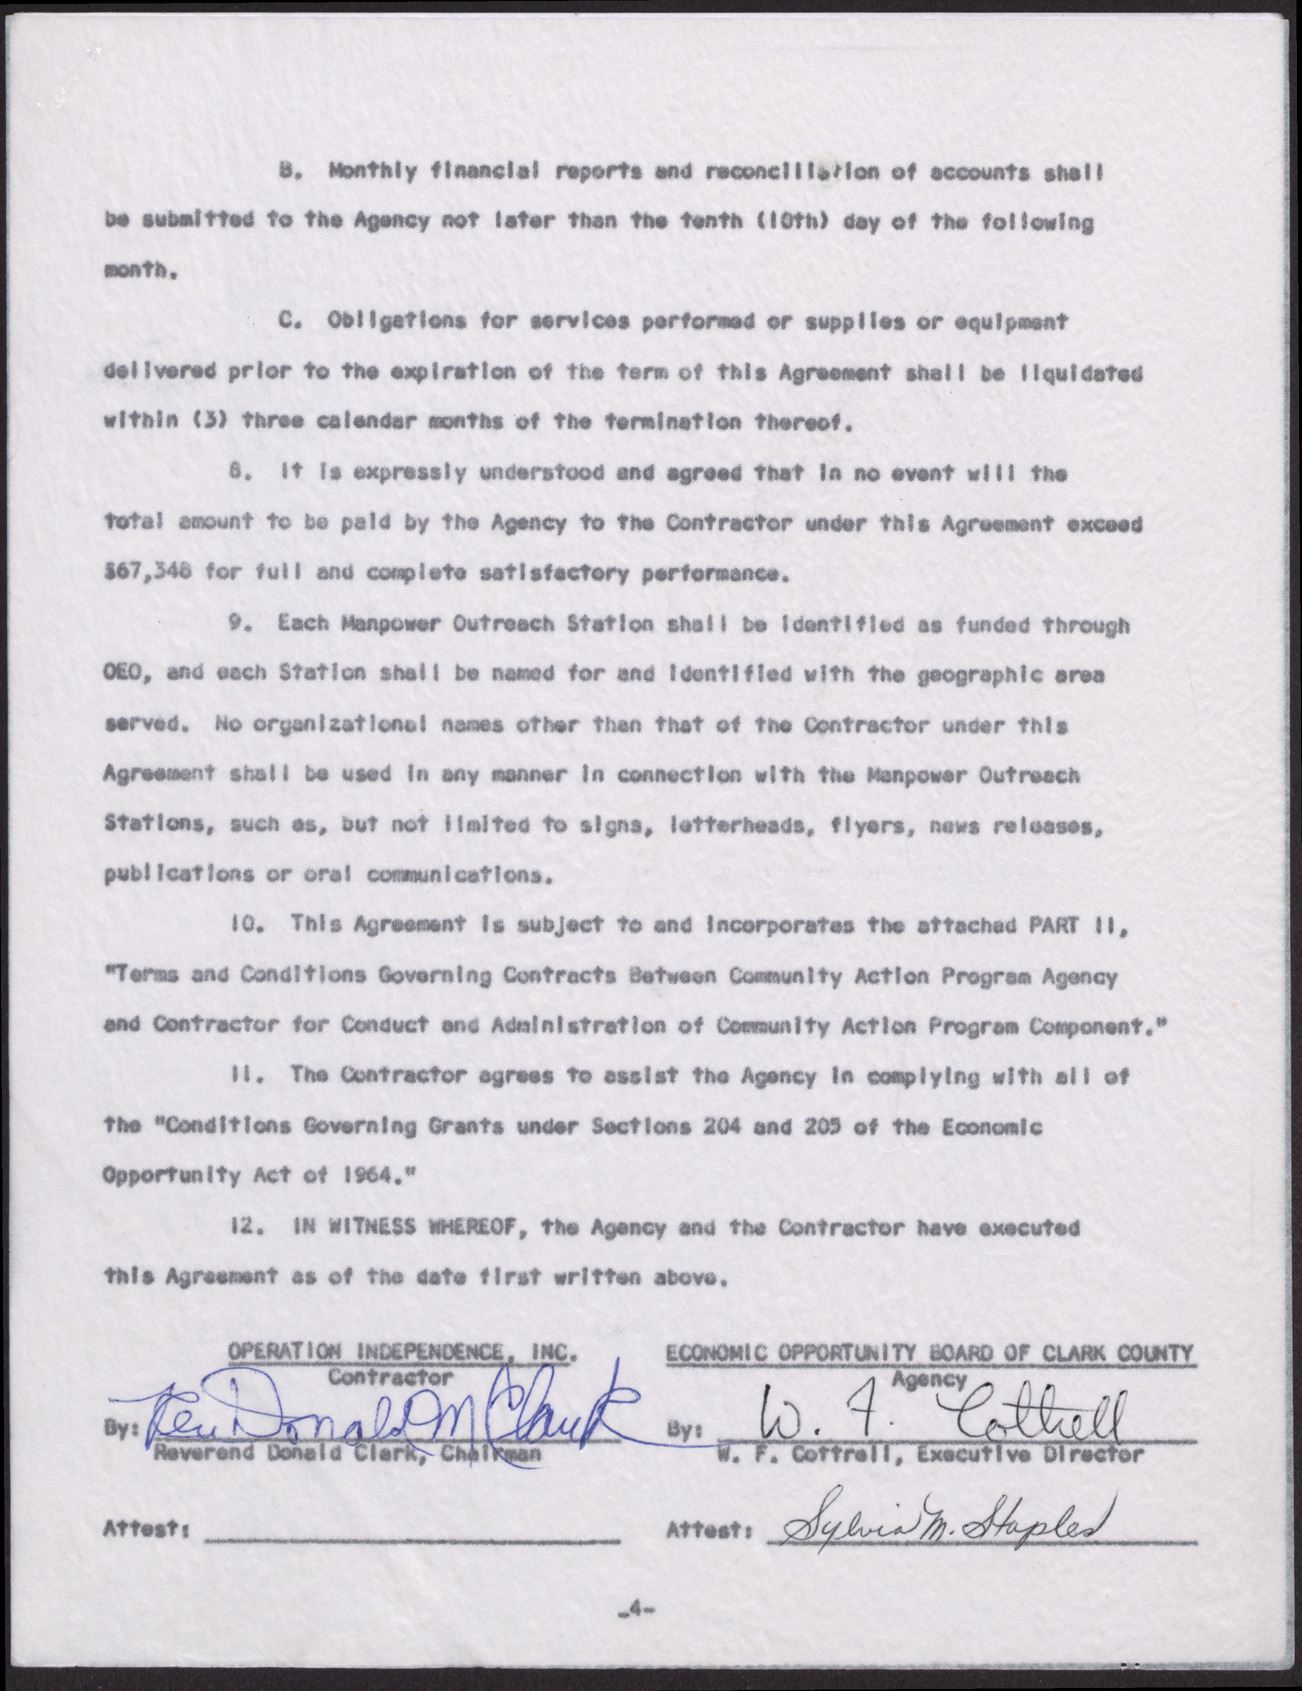 Contract of Agreement between the EOB and Operation Independence, Inc. (4 pages), August 1, 1967, page 4